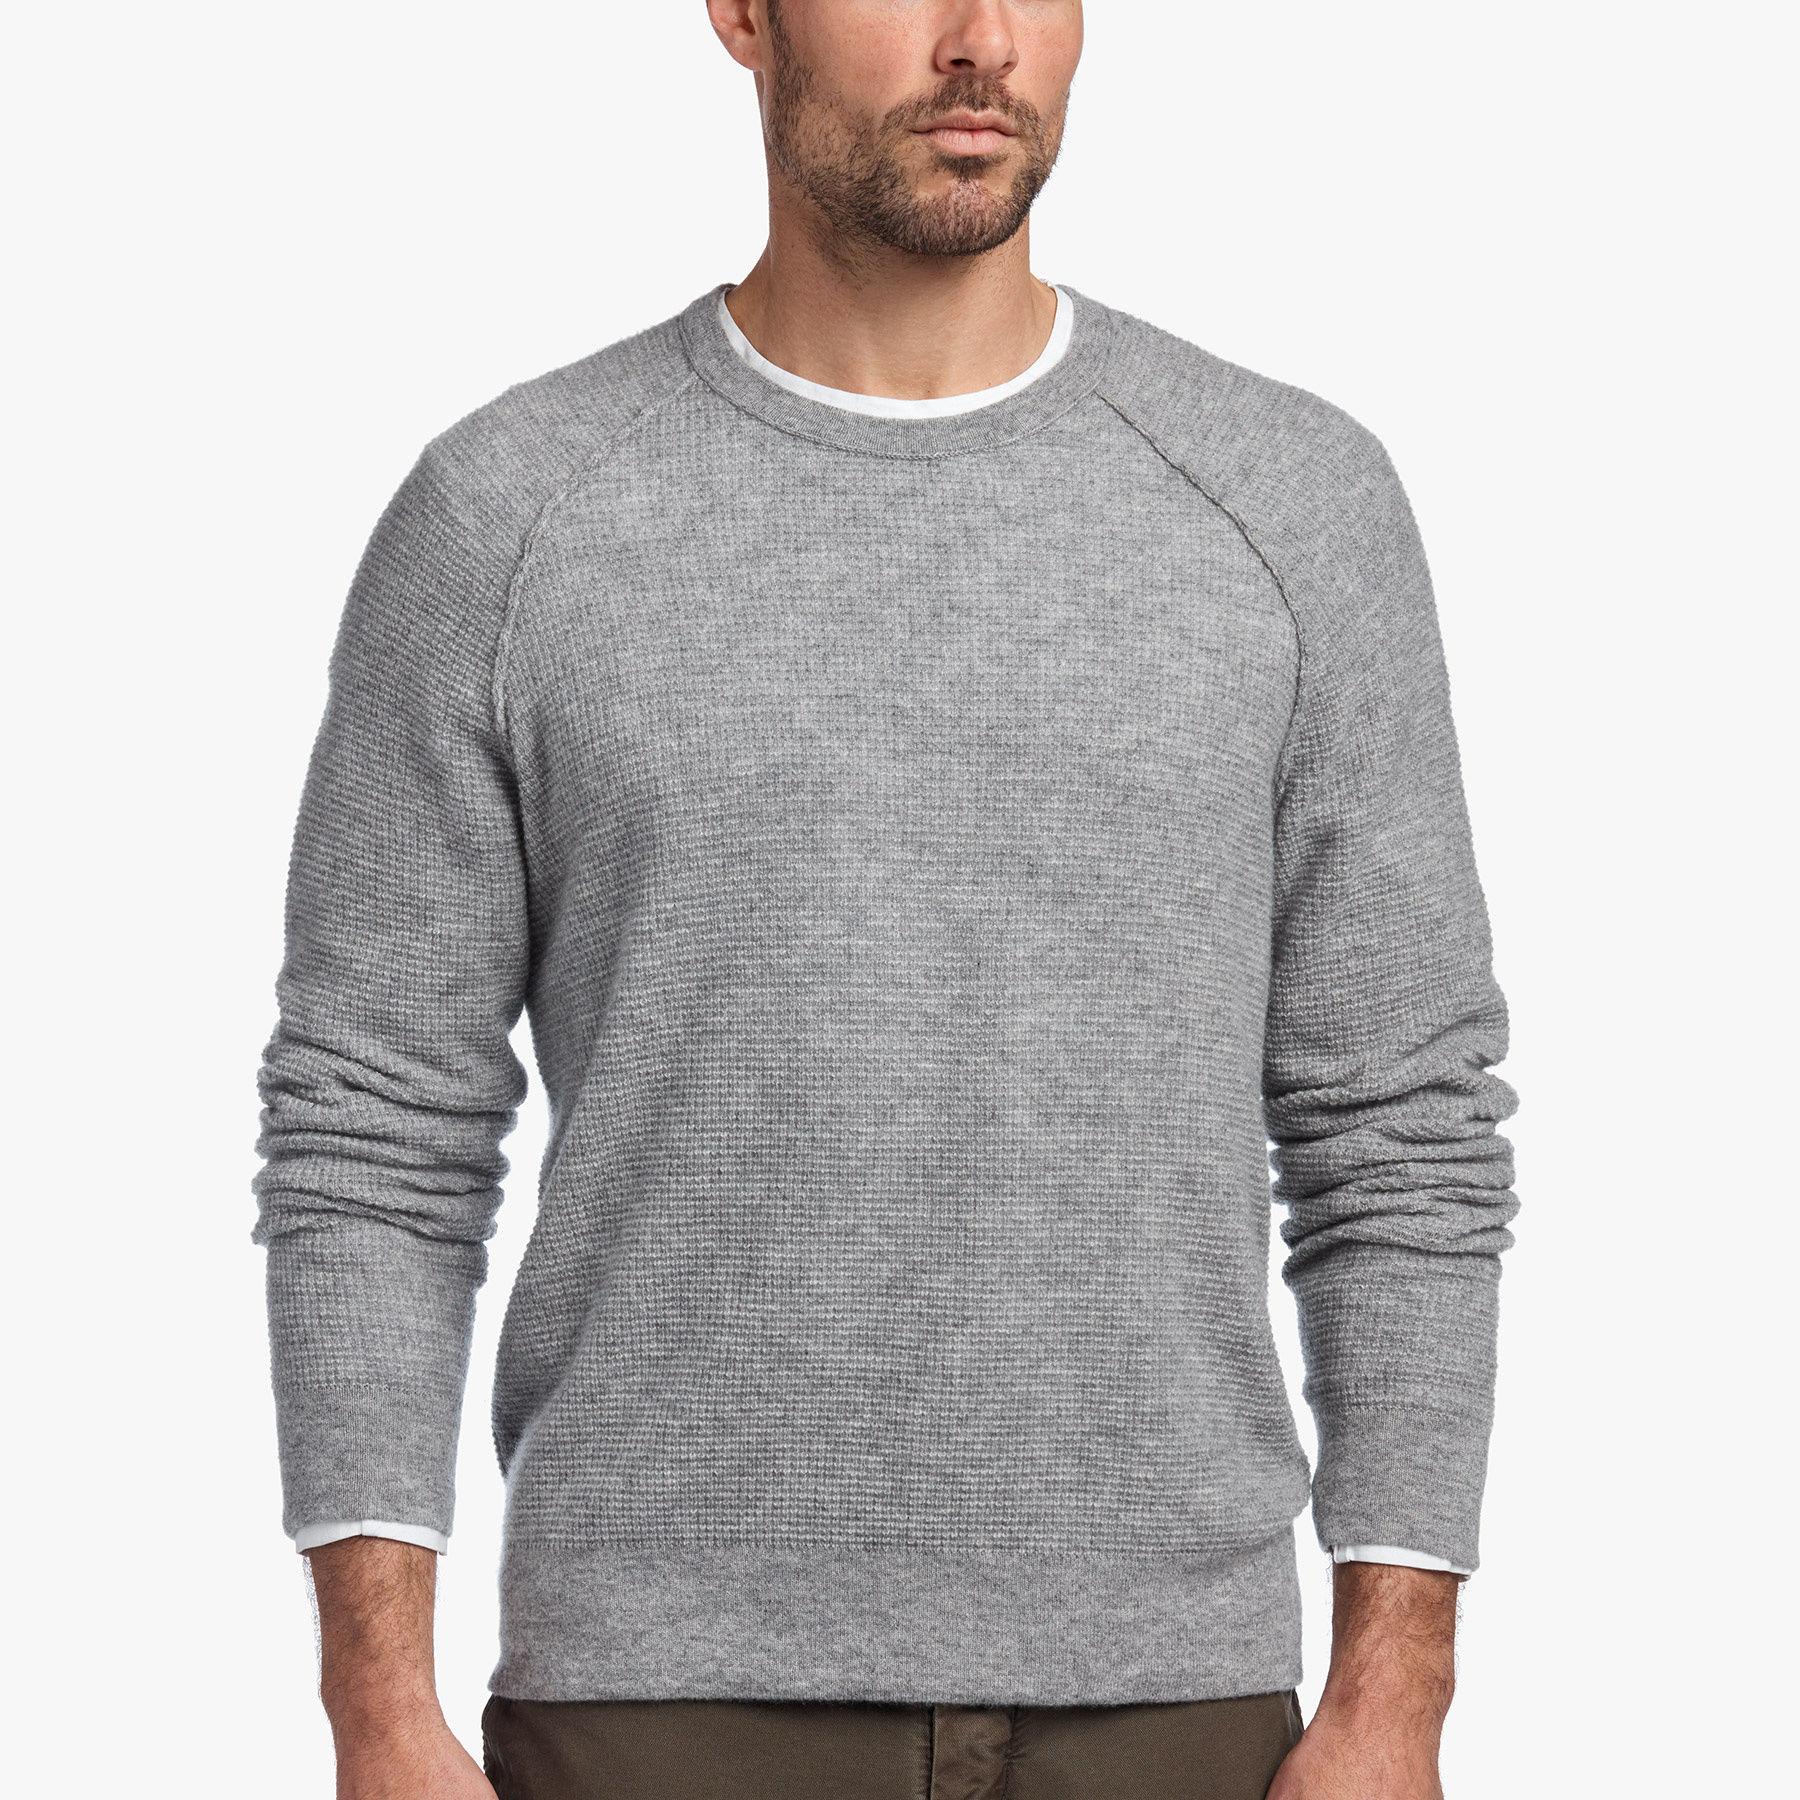 James Perse Cashmere Thermal Raglan in Heather Grey (Gray) for Men - Lyst